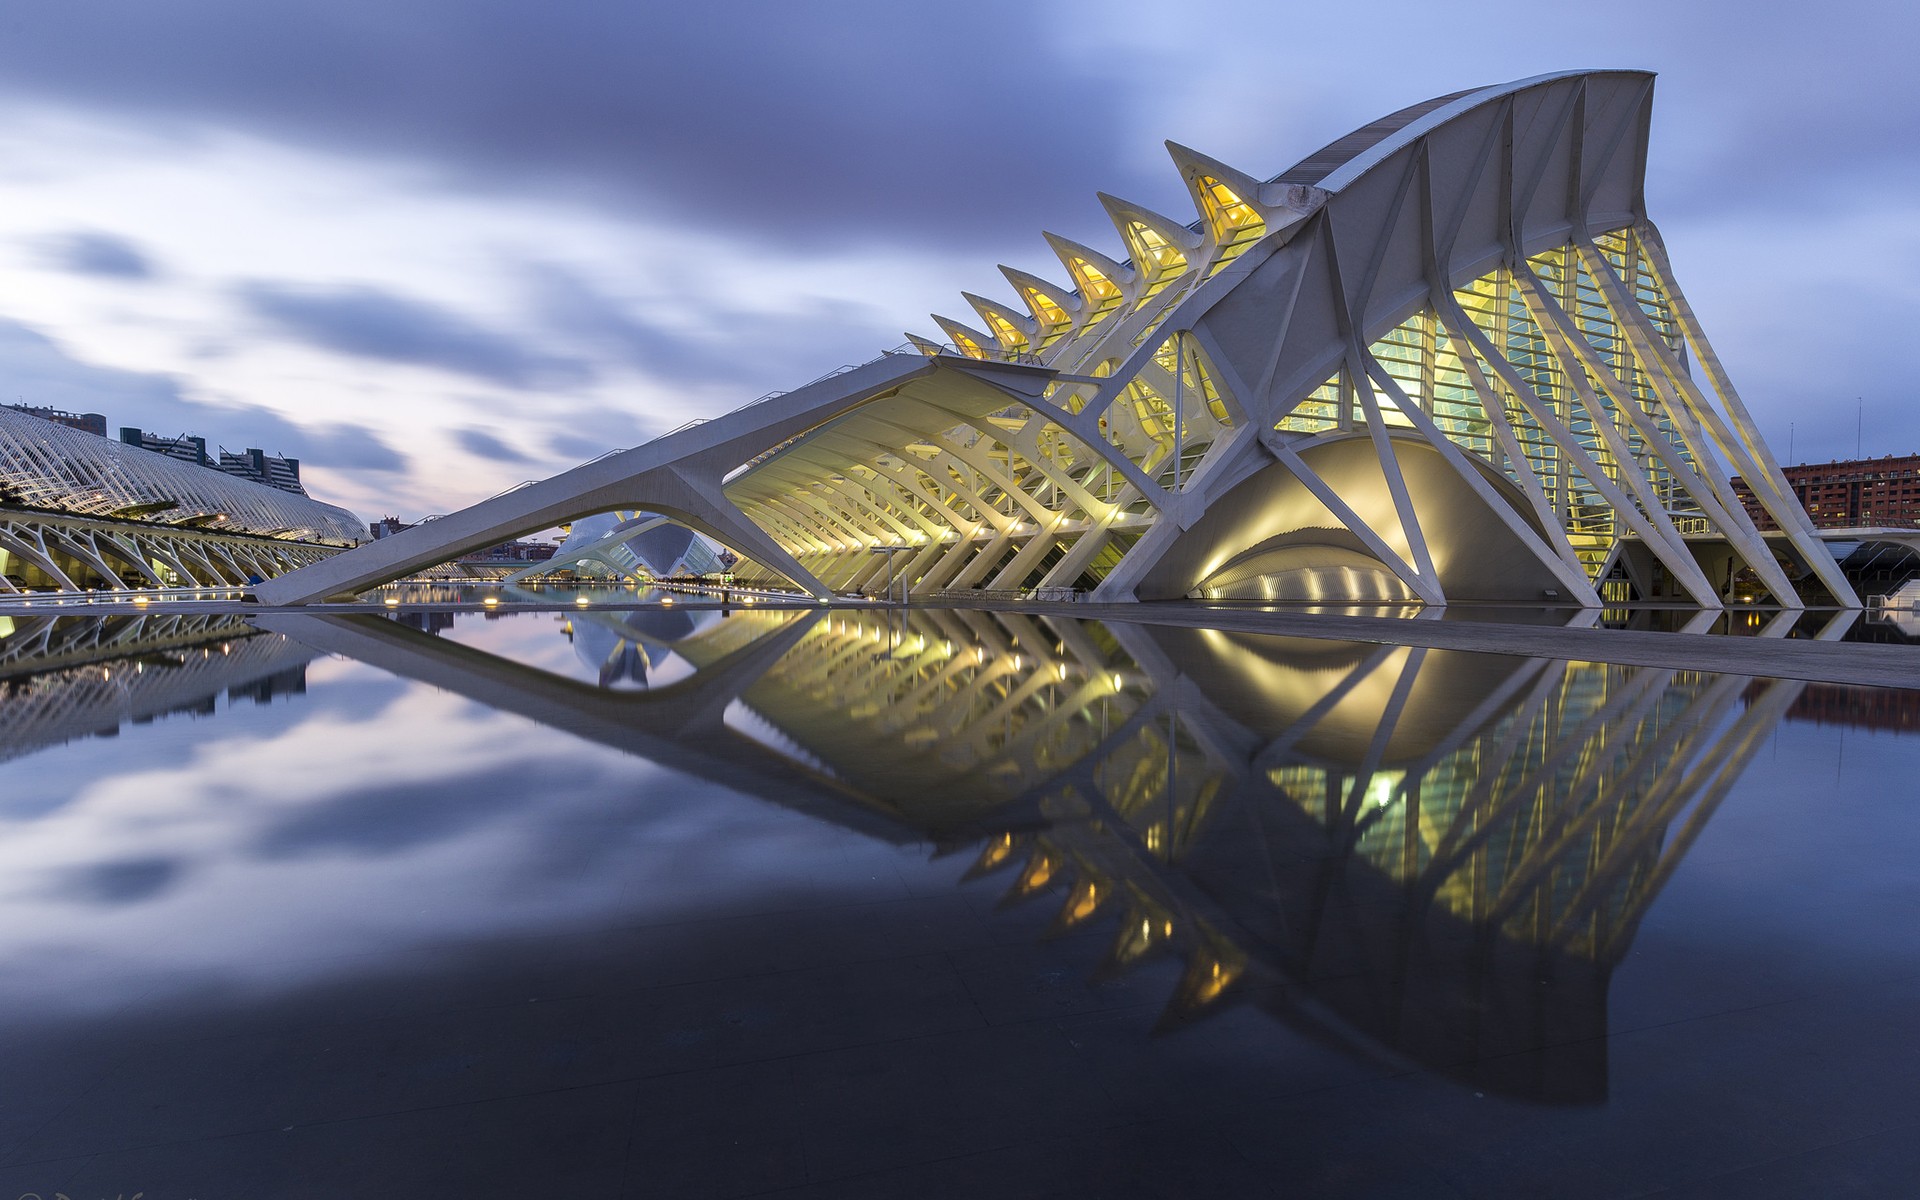 architecture, The Principe Felipe Museum, Long exposure, Spain, Reflection, Shadow, Clouds, Valencia, Sunset Wallpaper